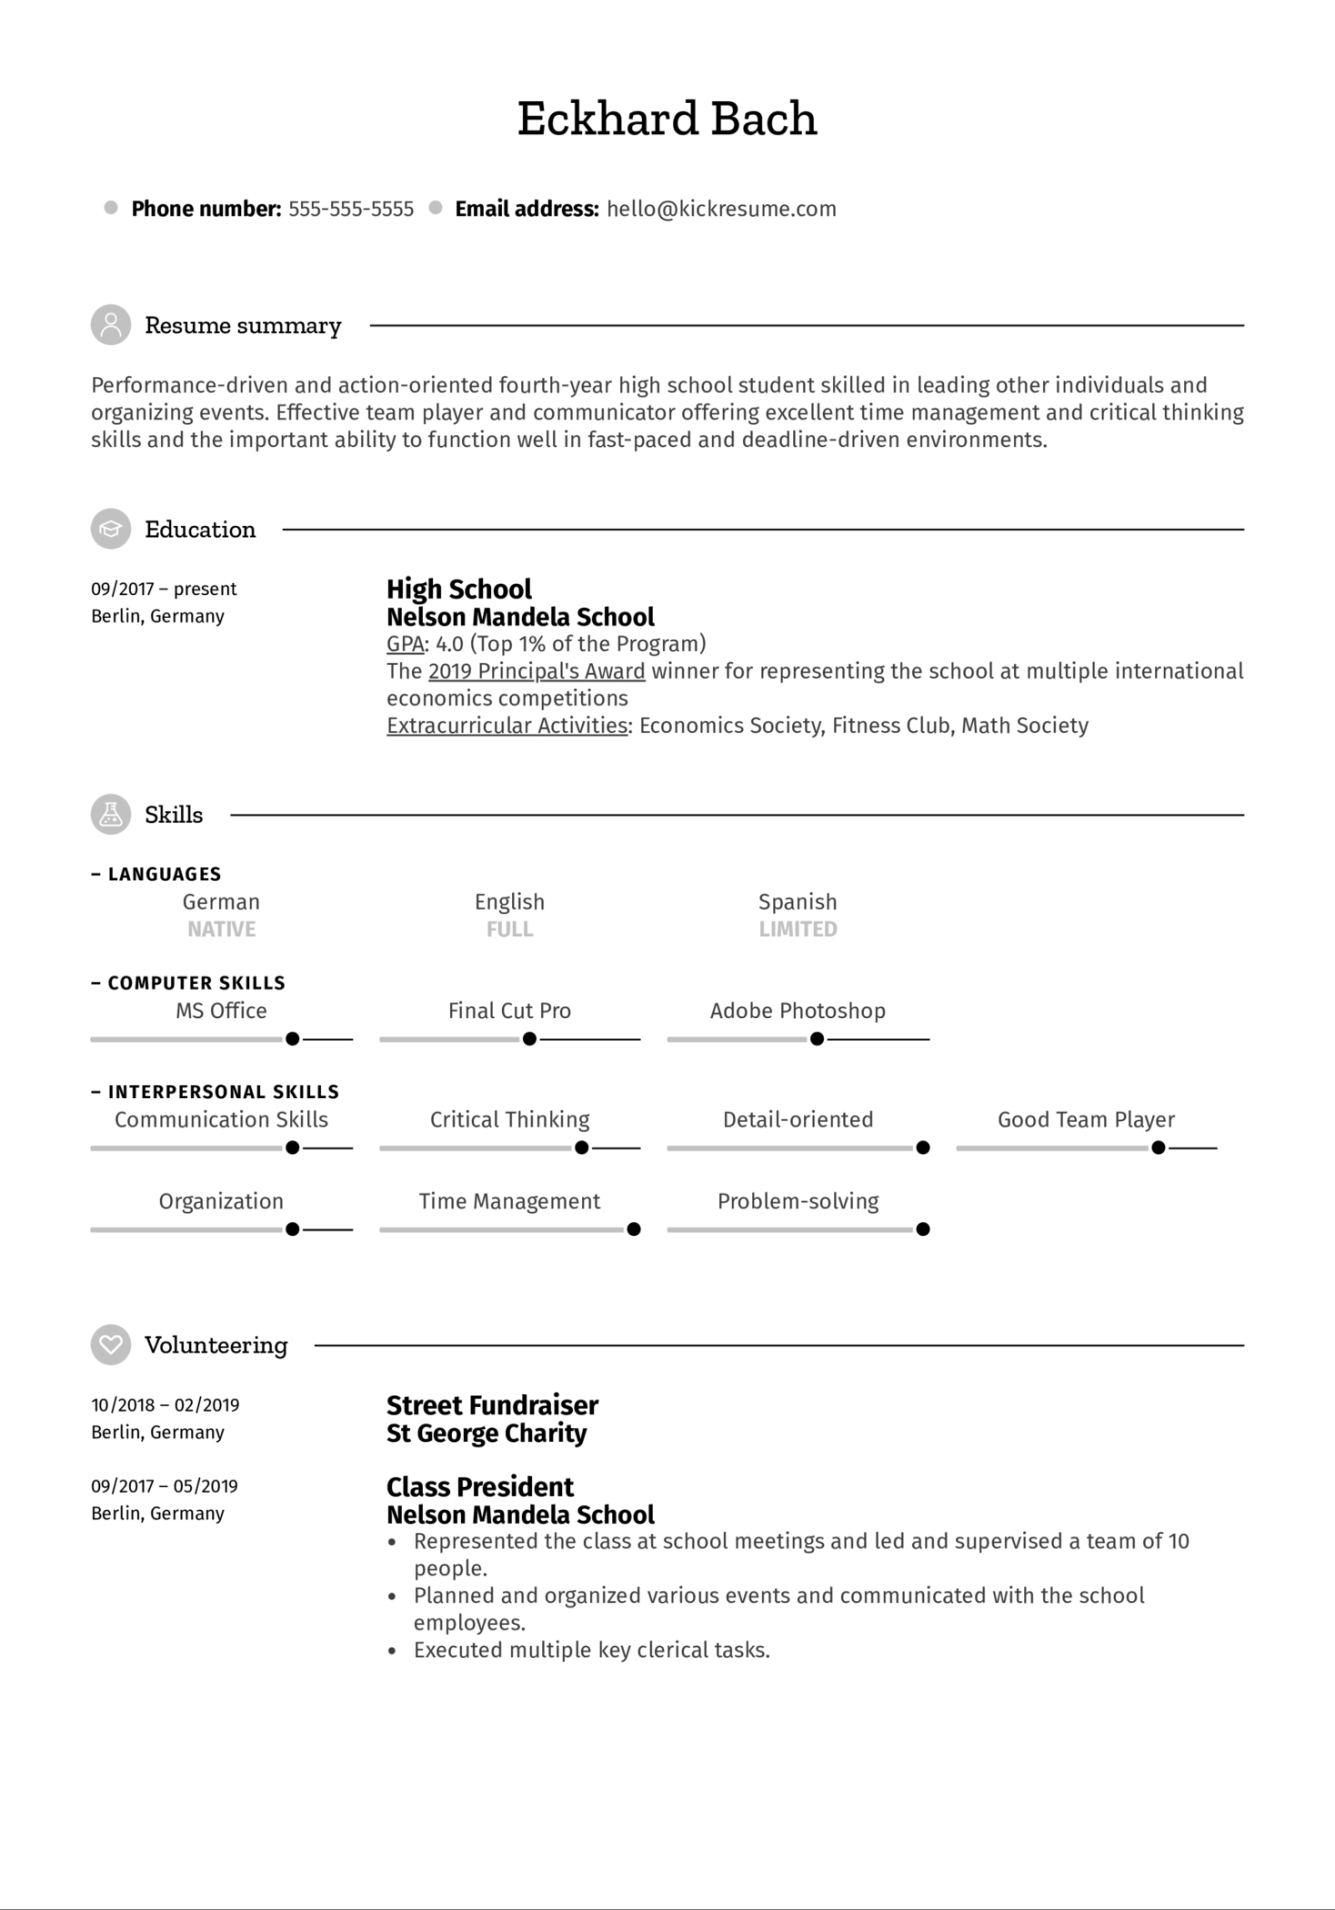 CV Template for the First Job  Kickresume